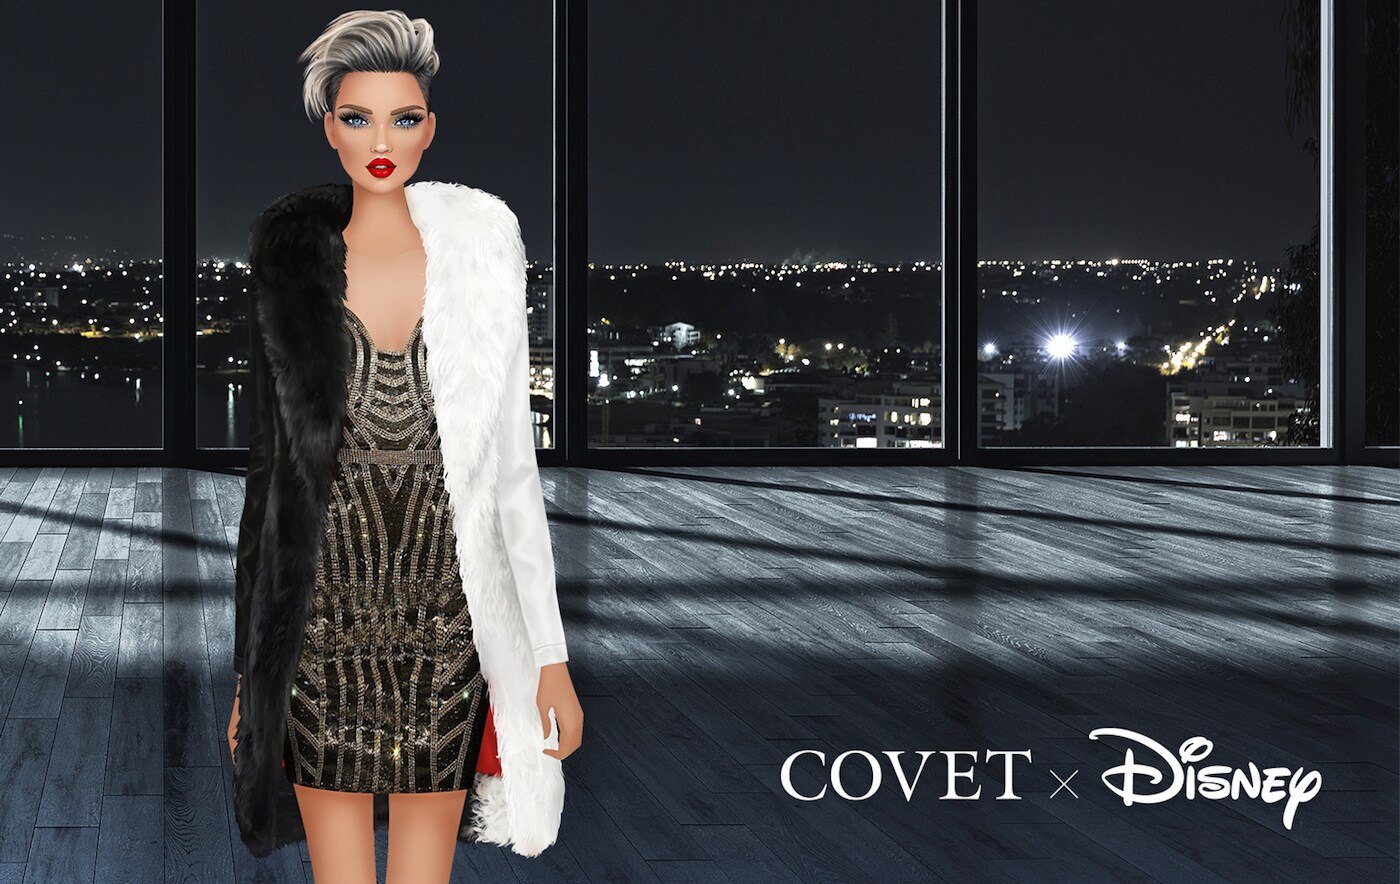 A different outfit look for Cruella de Vil from Covet x Disney